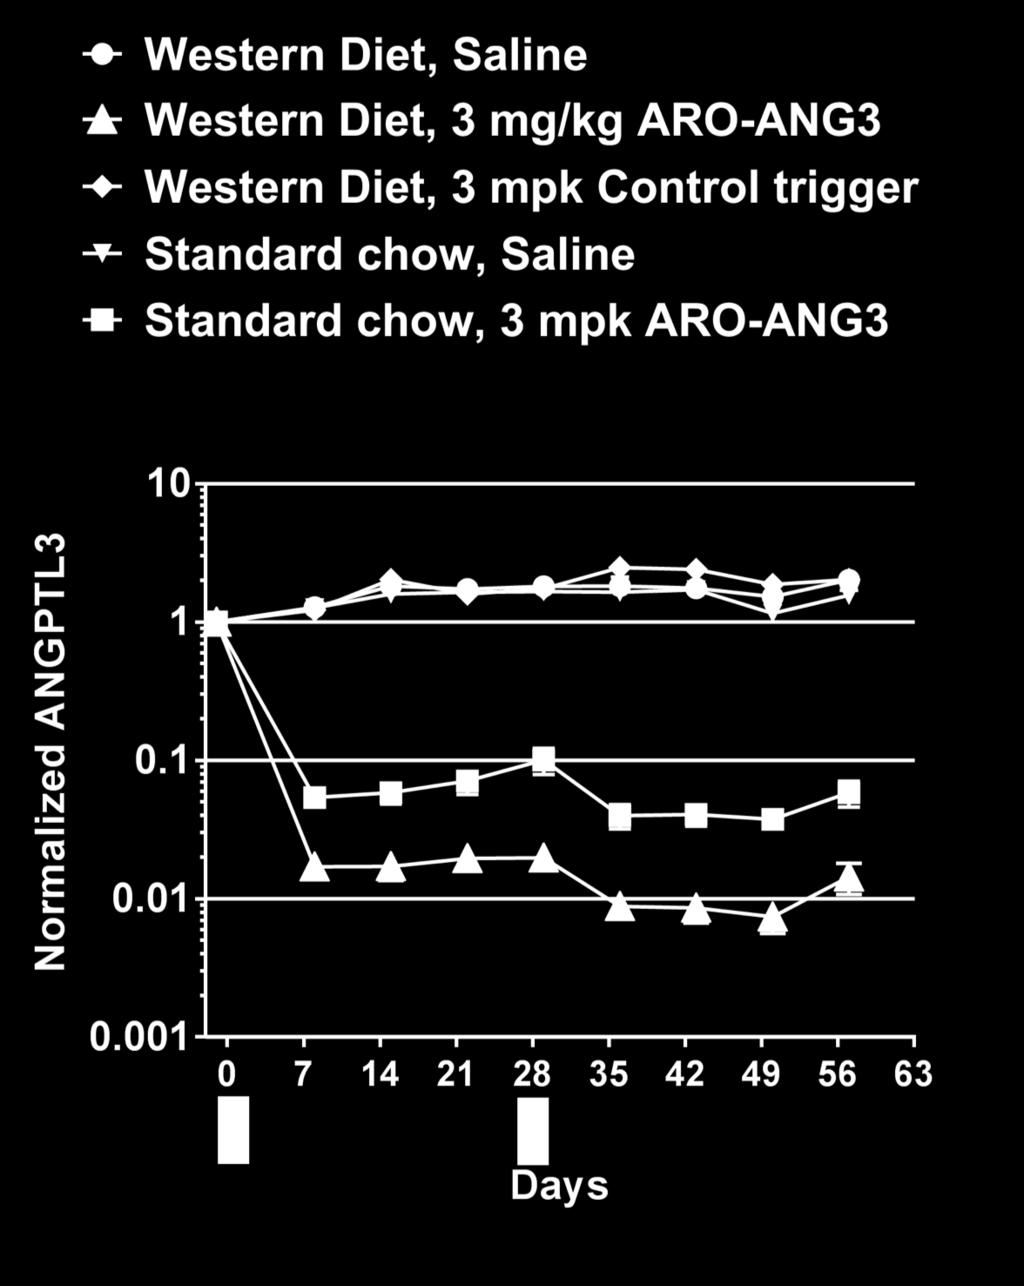 diet) by qrt-pcr Maximum ANGPTL3 protein reductions in ARO-ANG3 after each dose After 1 st dose After 2 nd dose Standard chow 95% 96% Western diet 98%